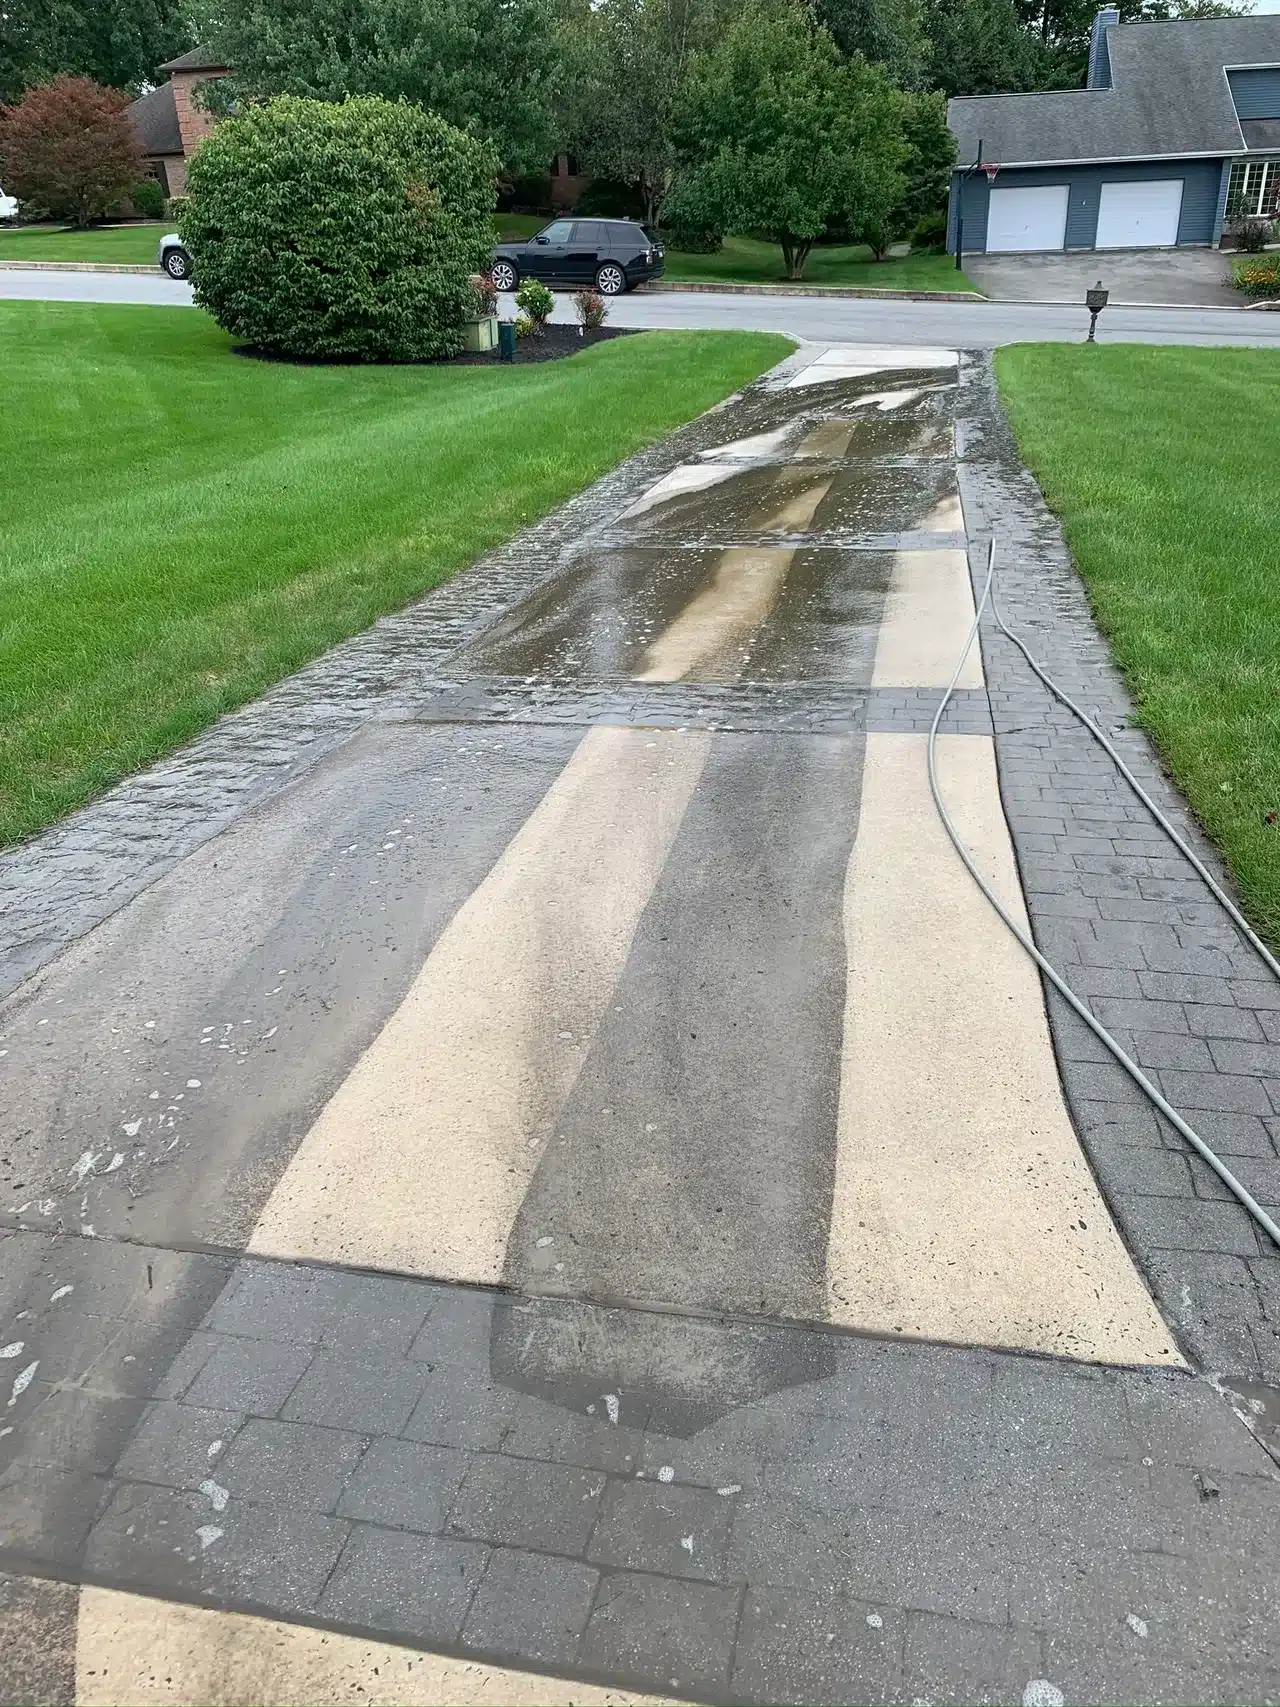 A home's drive way being cleaned.